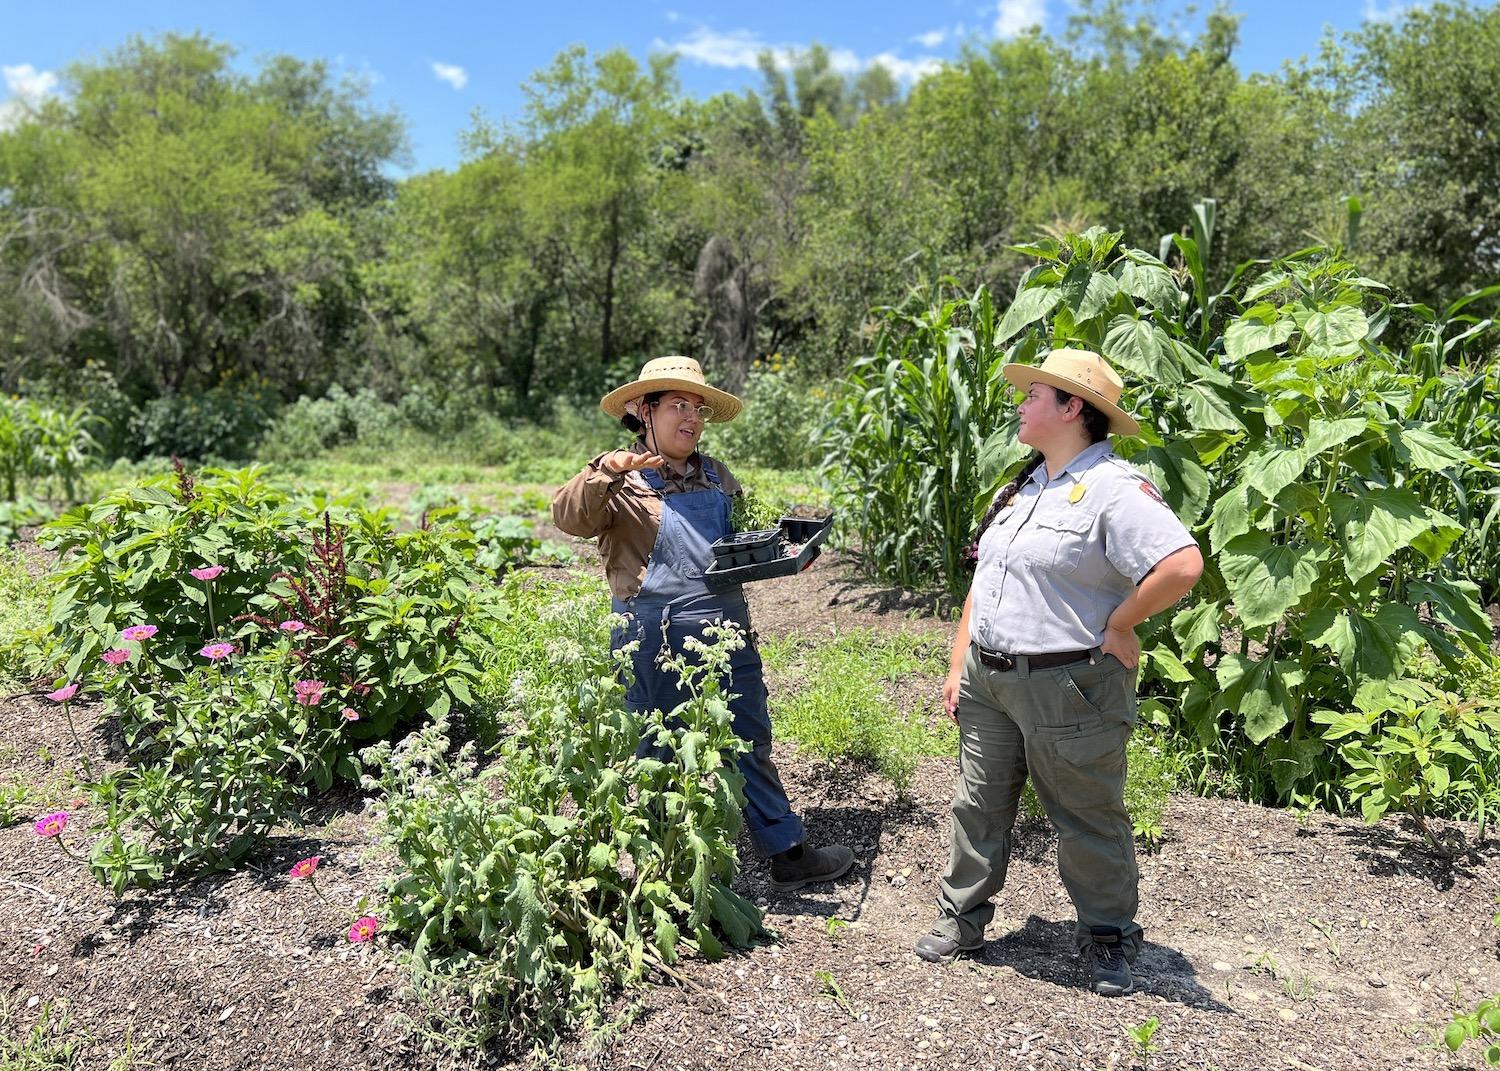 In the demonstration field at Mission San Juan, the San Antonio Food Bank's Liliana Reyes farms and chats with National Park Service ranger Destiny Gardea.